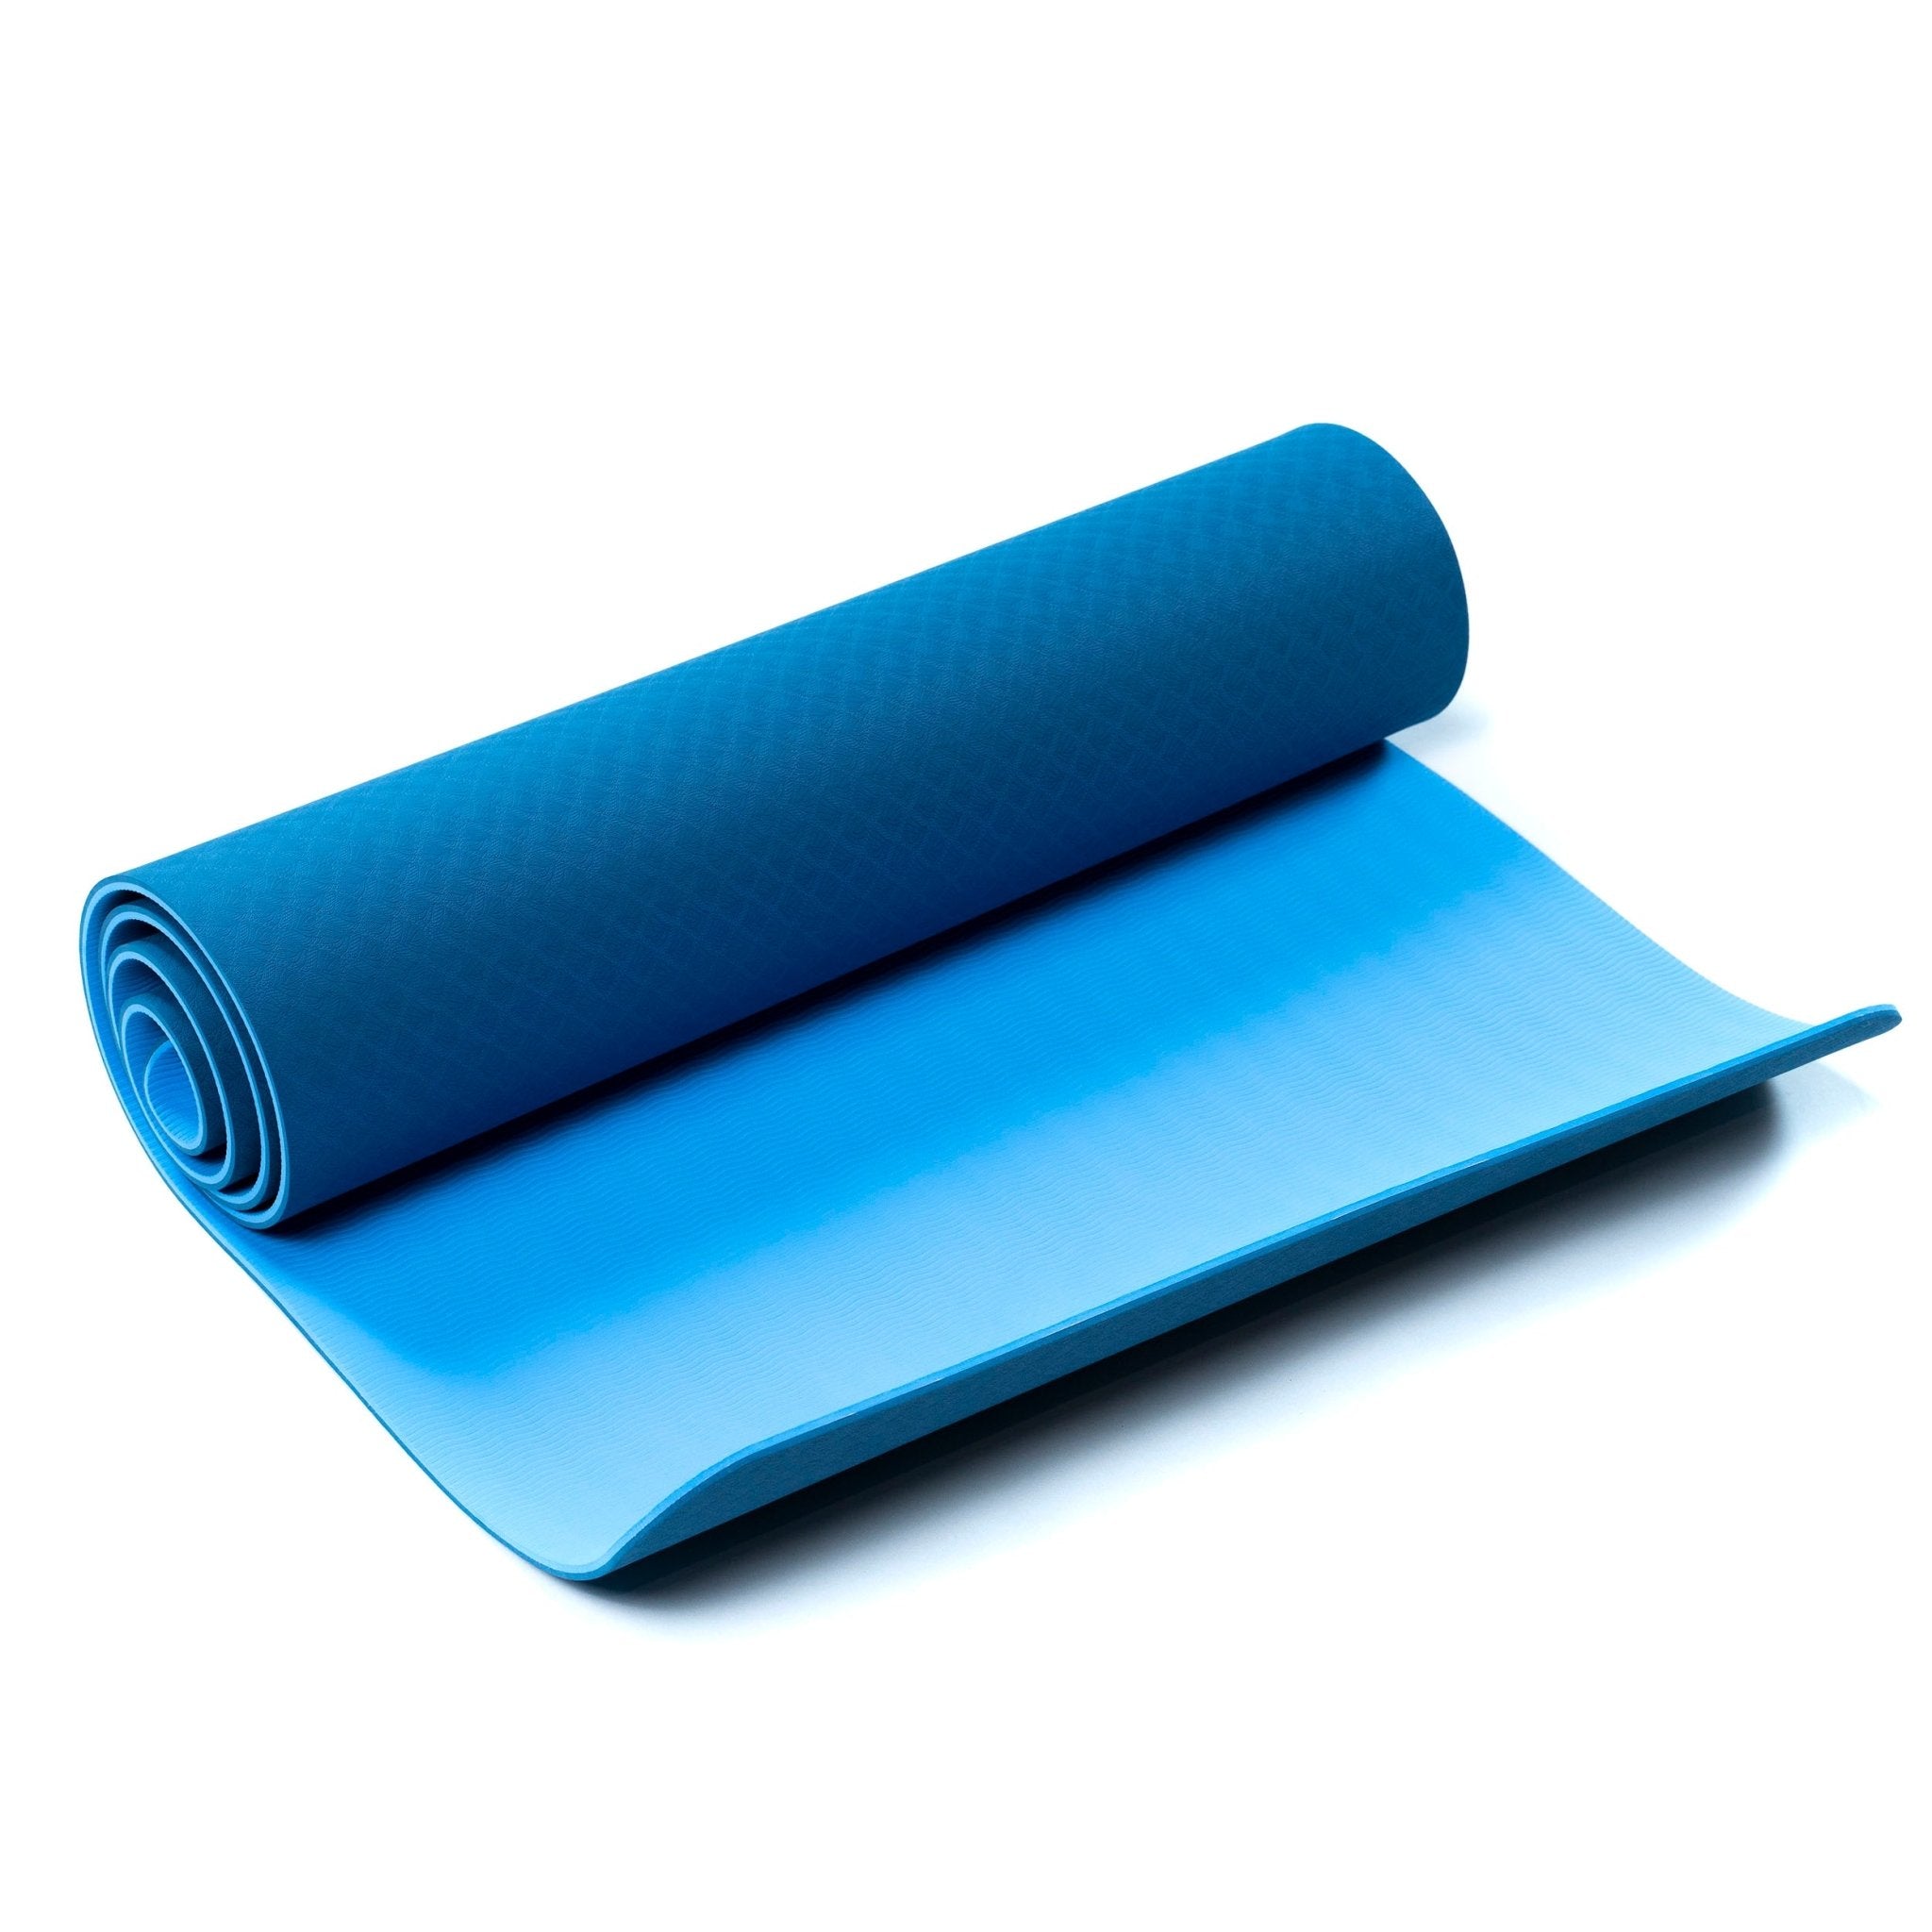 MIKASHU Yoga Mat for gym Workout and yoga exercise with 6mm 6 Feet long & 2